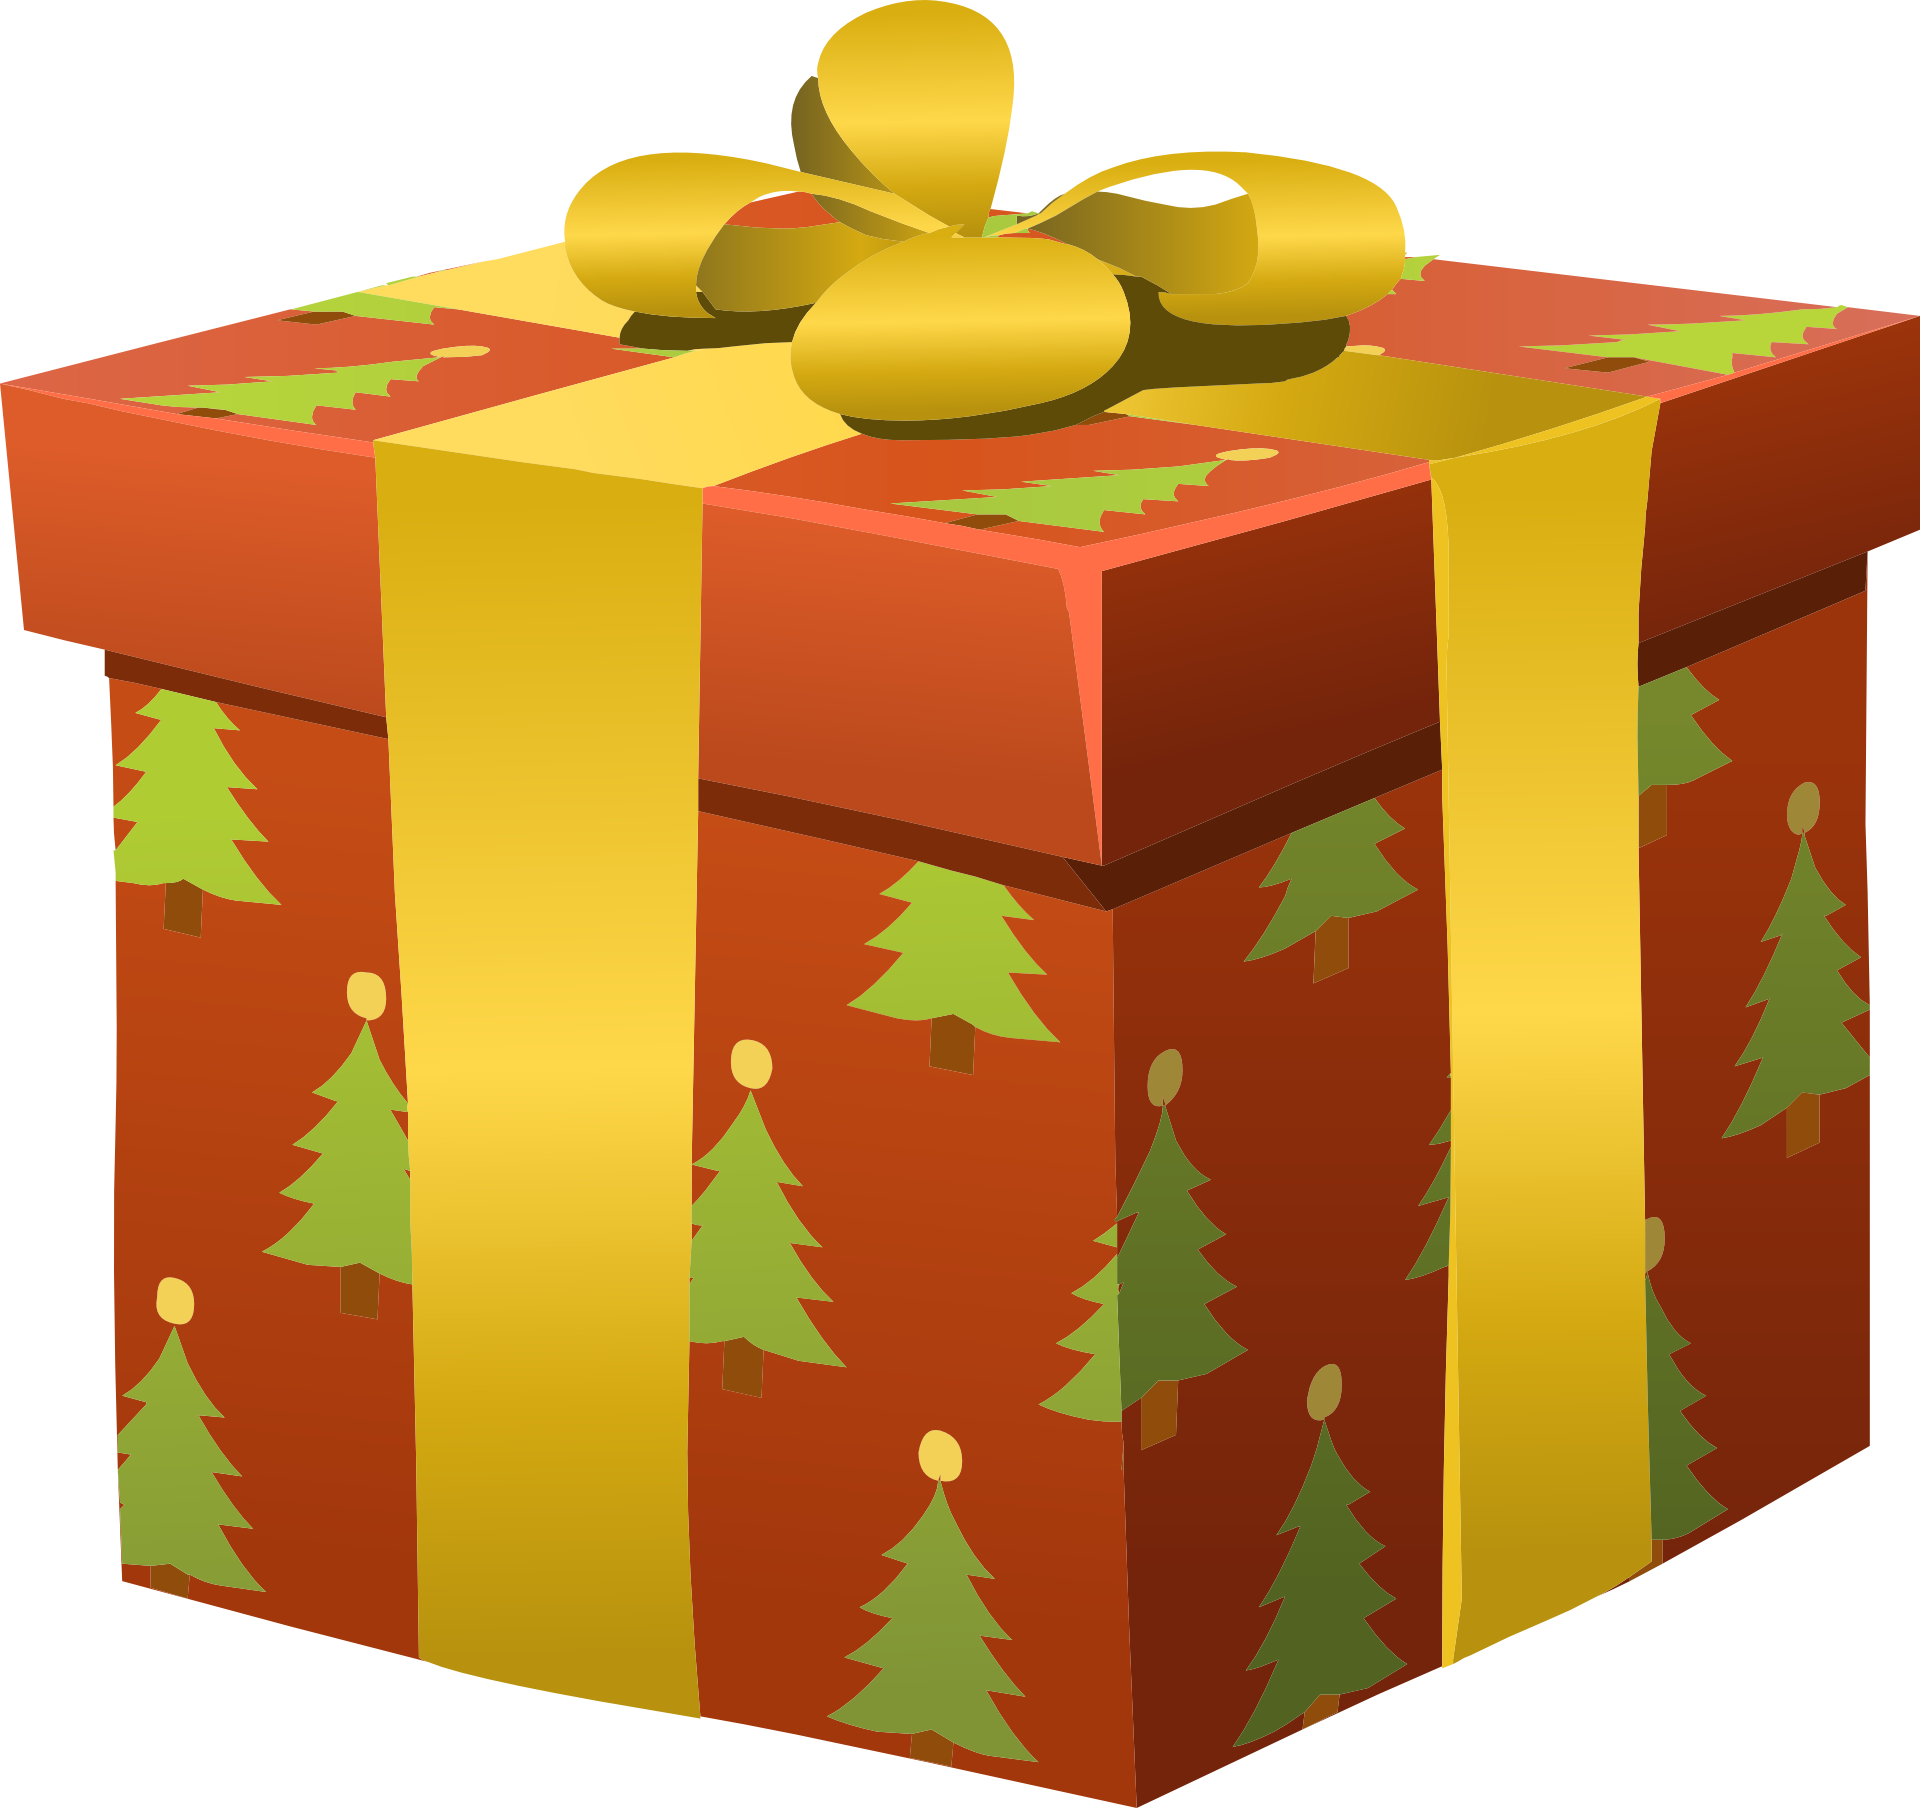 Presents wrapped gifts christmas free image download